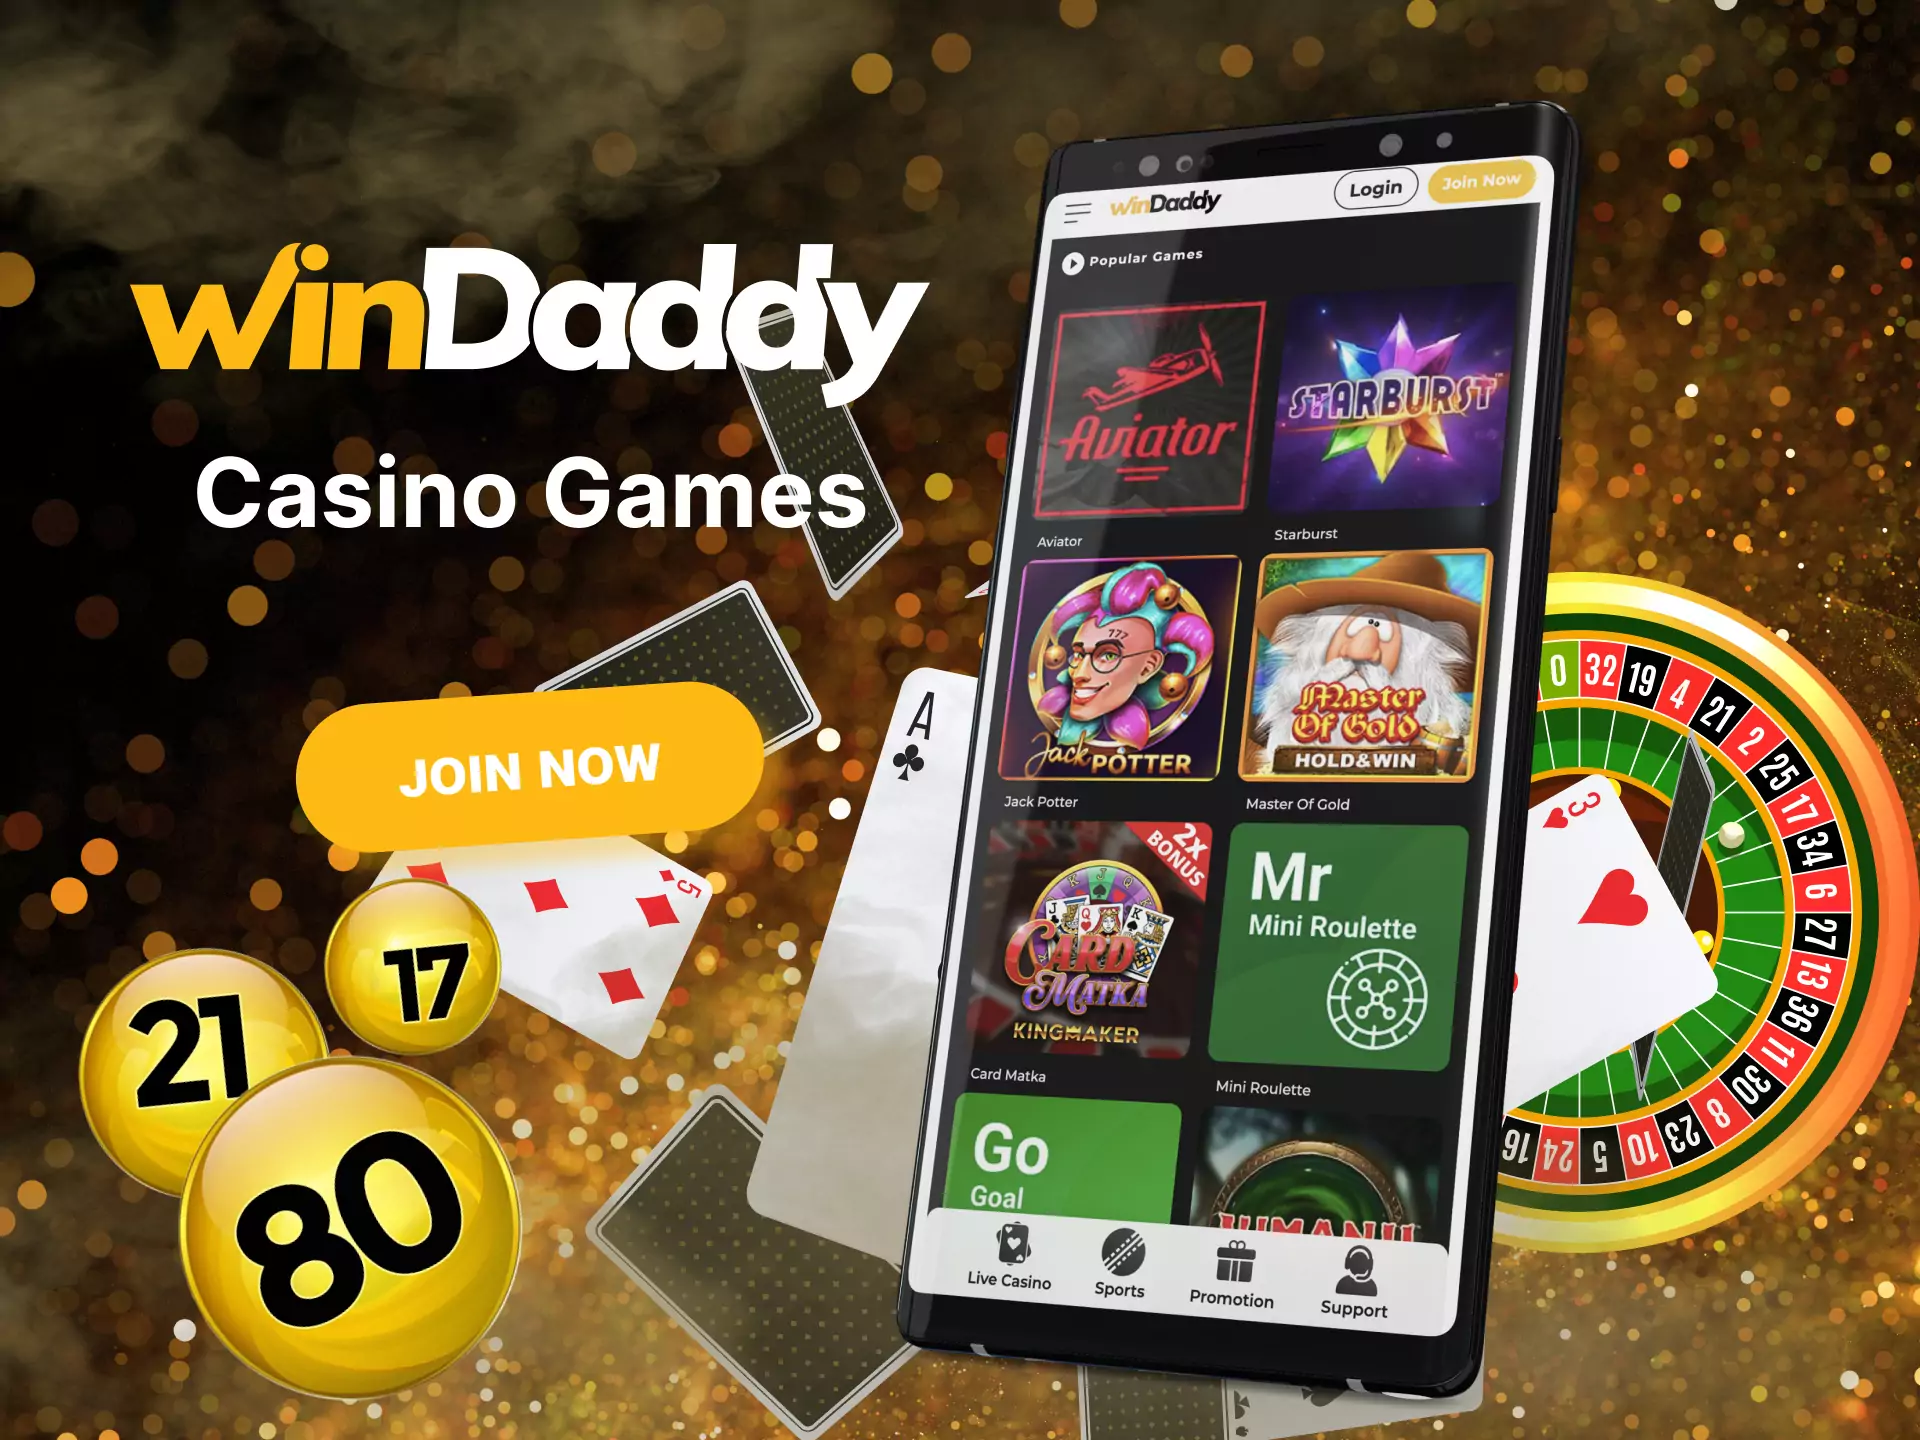 Try different types of games at Windaddy Casino.